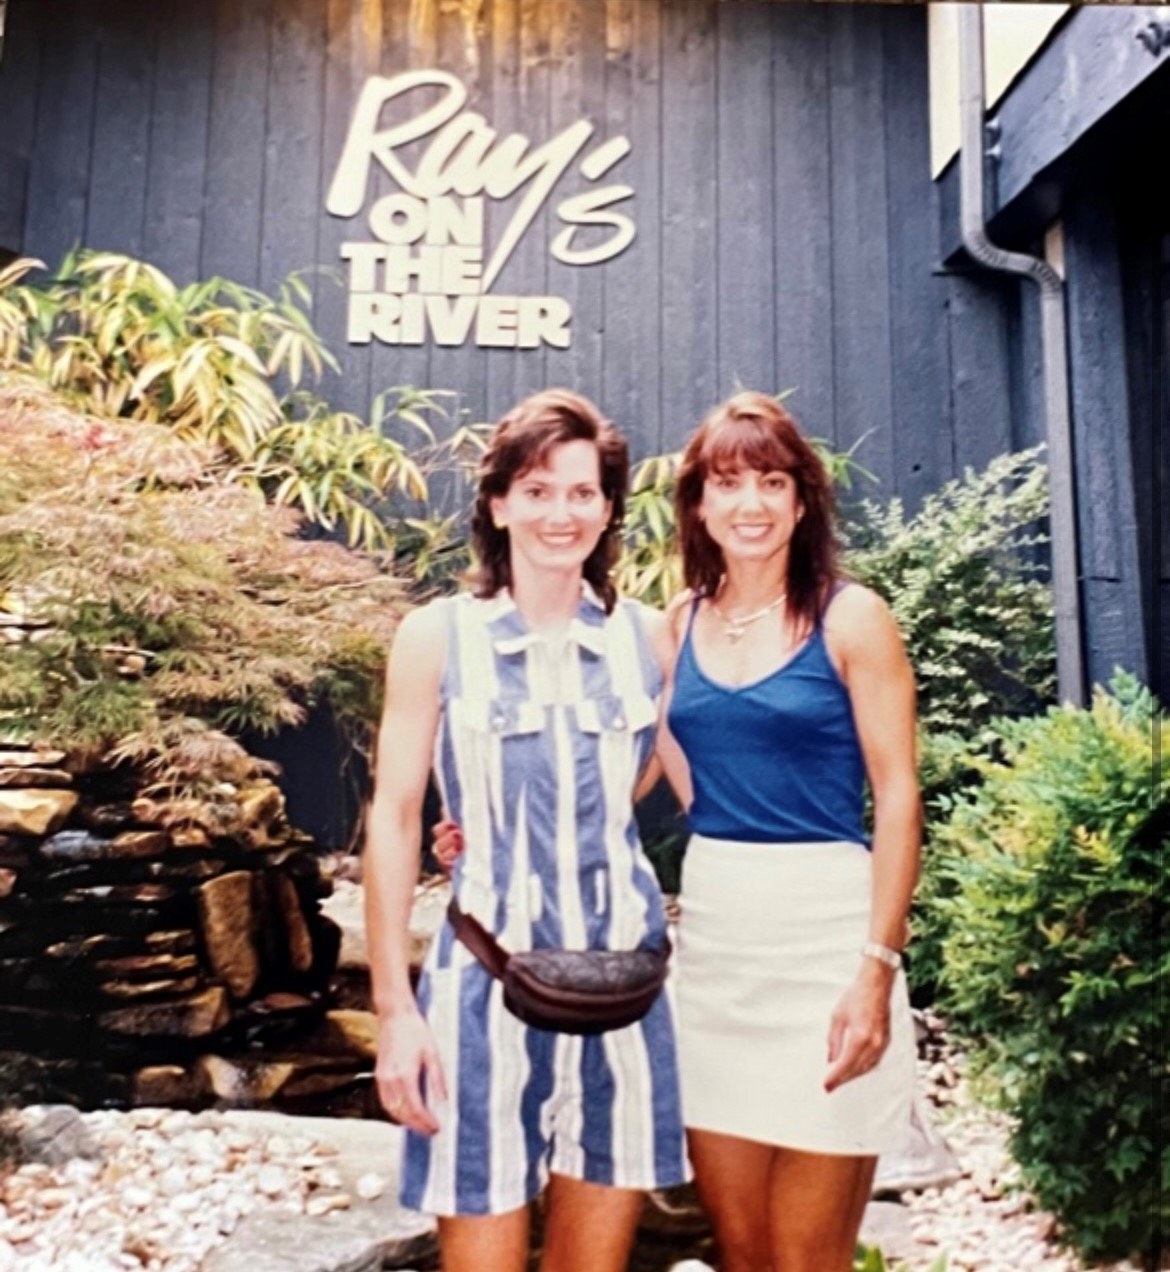 A photo of Lynn and someone else outside of Ray's on the River decades ago.